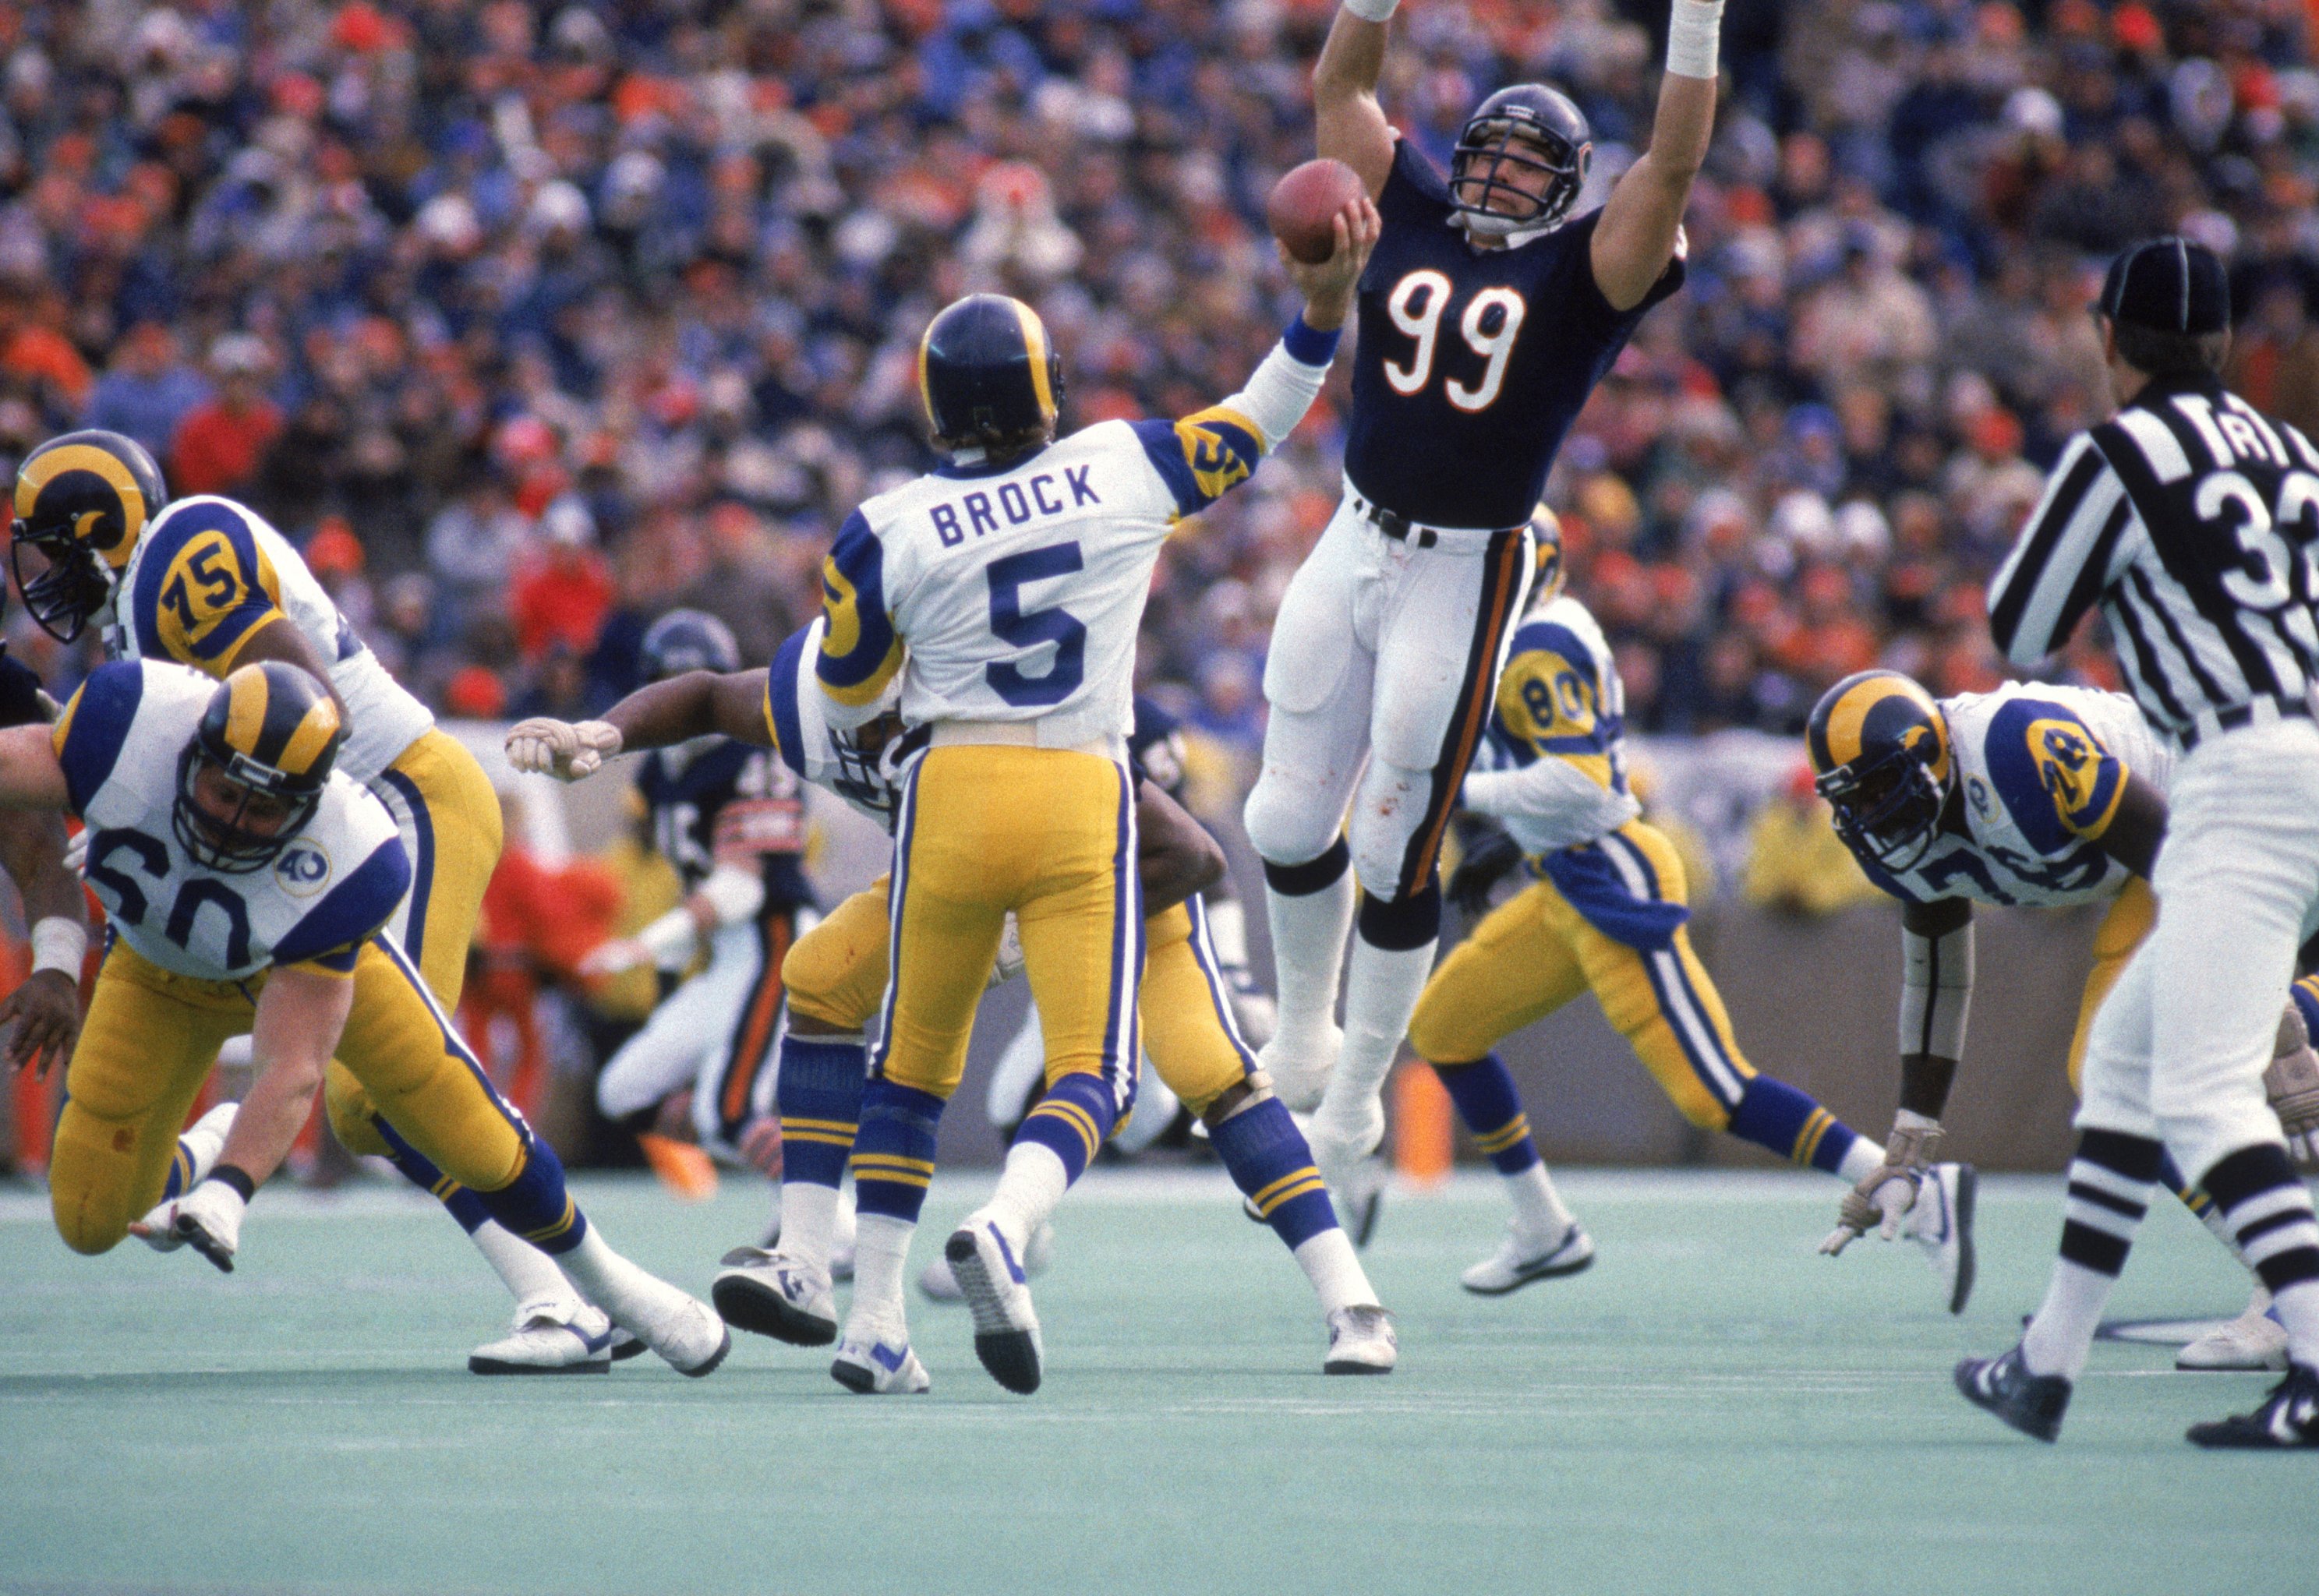 Top 3 All-Time NFL Defenses - #3 The 1976 Steel Curtain 